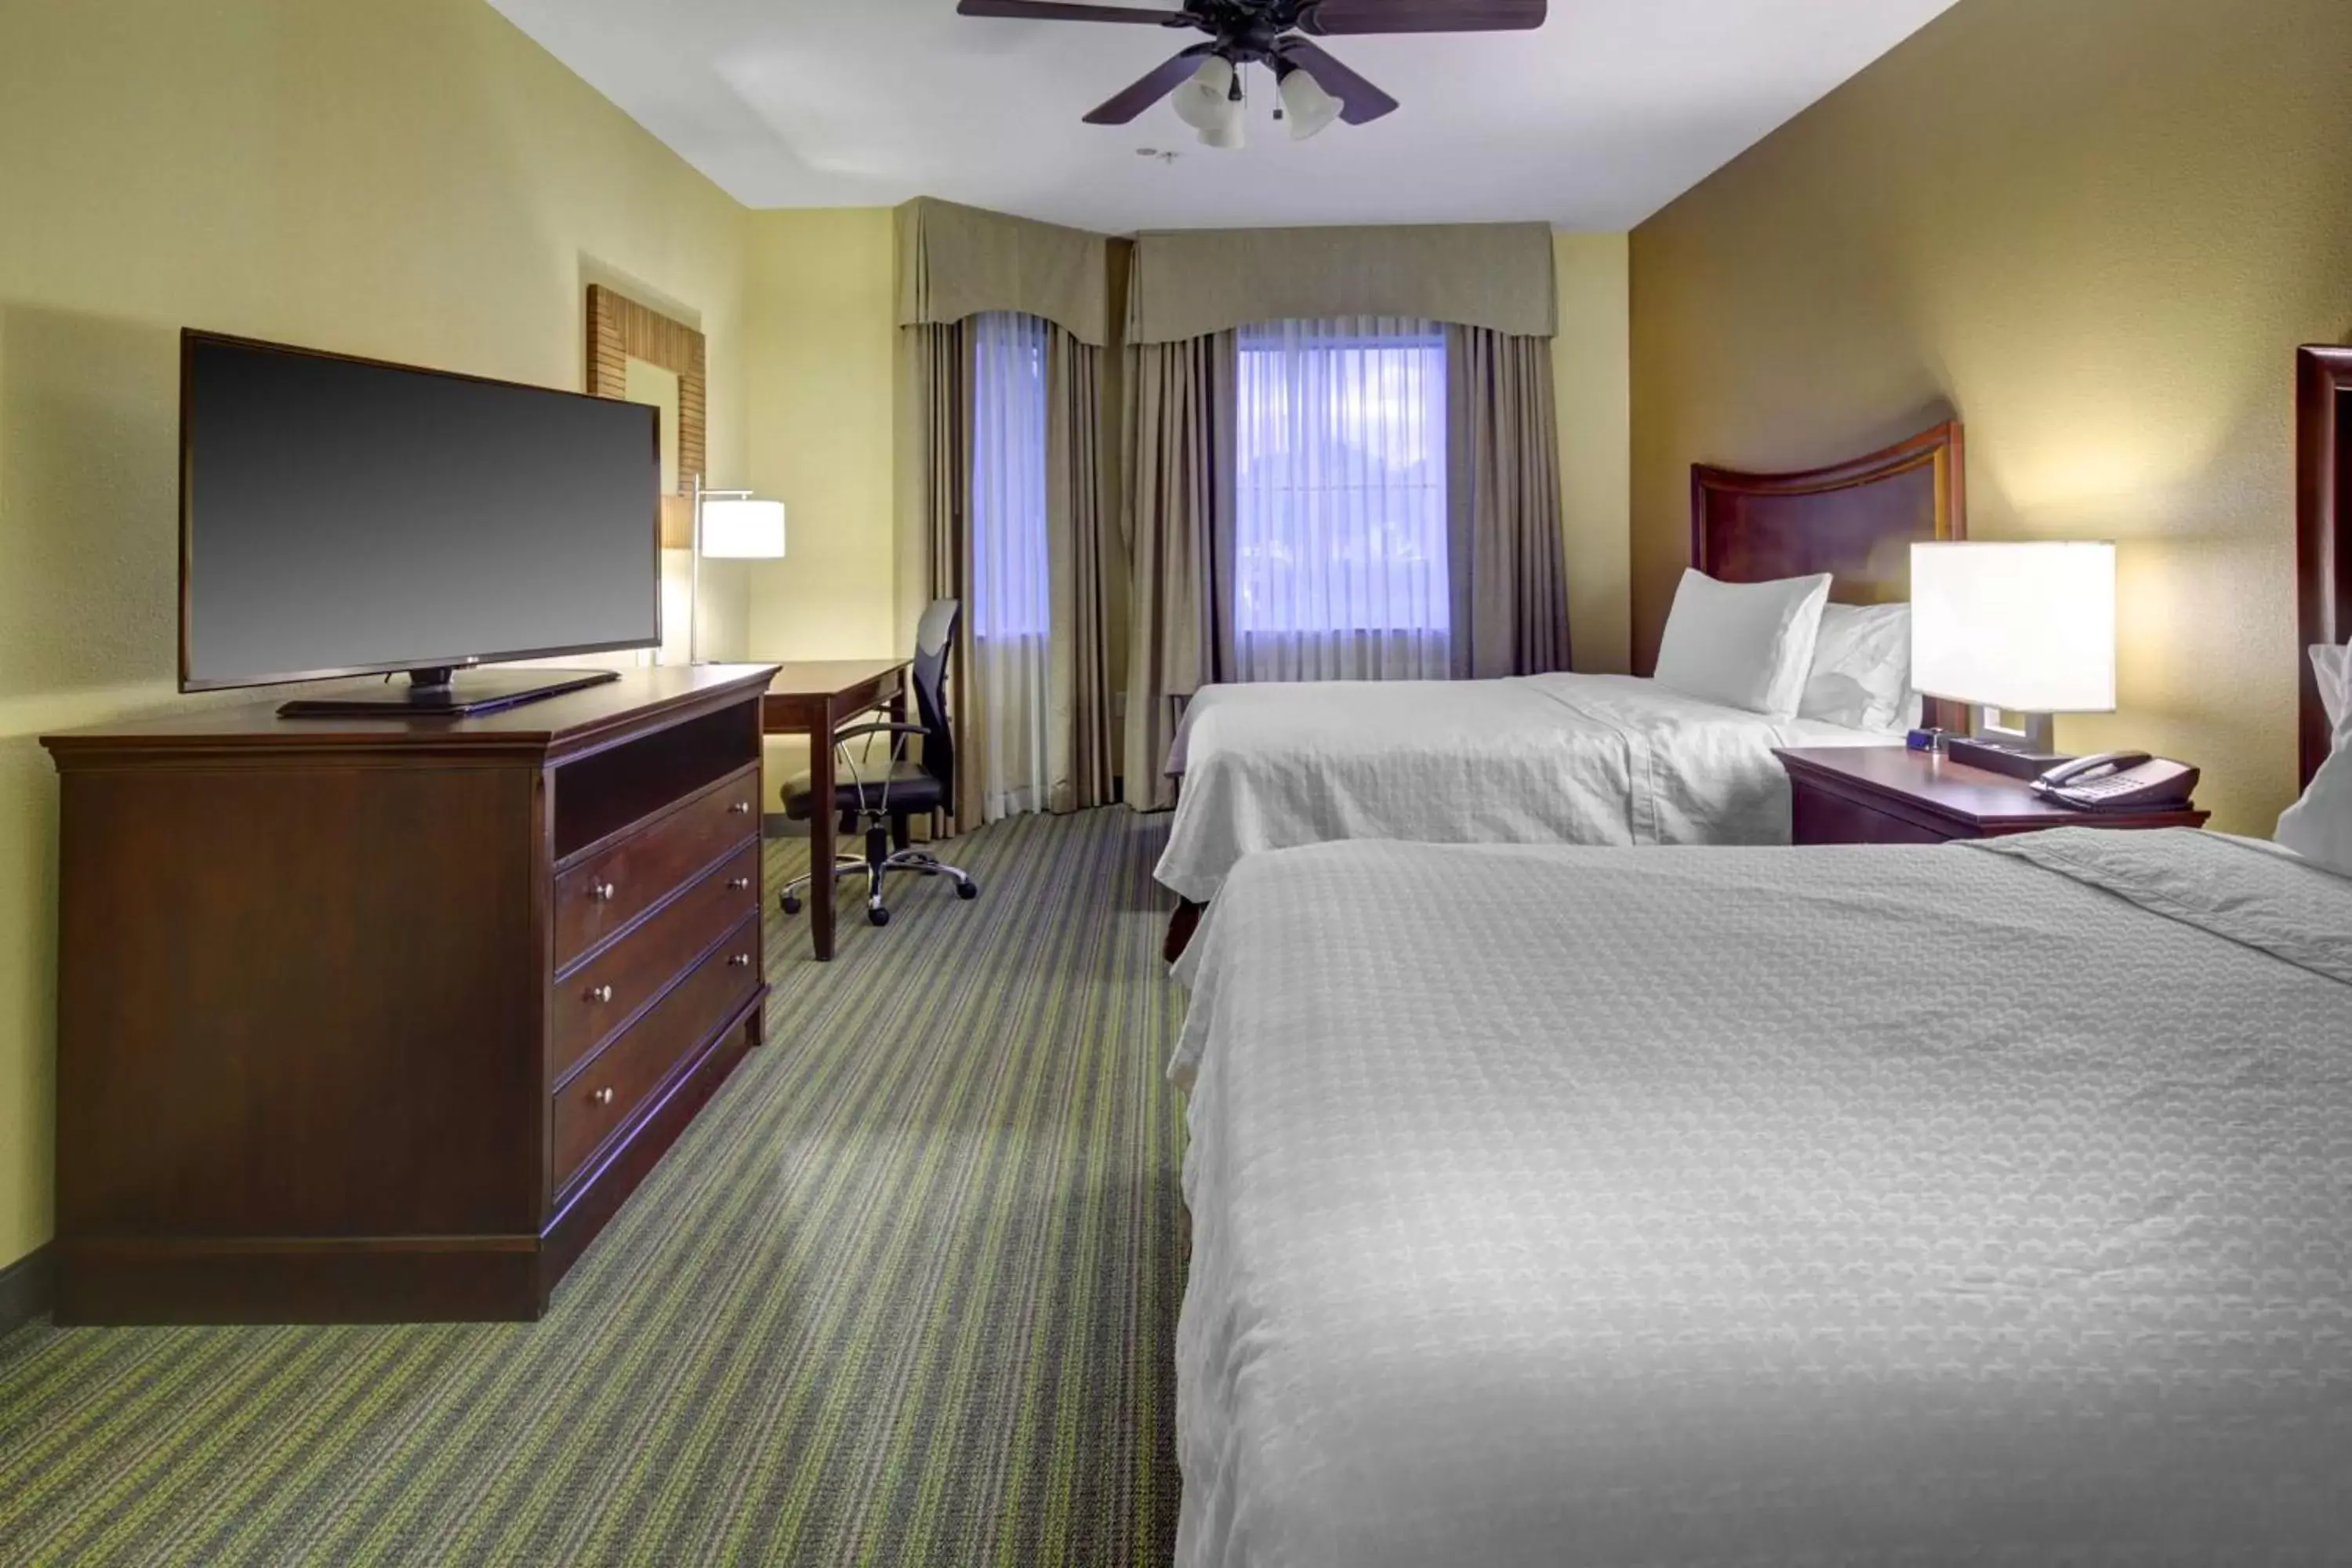 Bedroom, TV/Entertainment Center in Homewood Suites by Hilton West Palm Beach